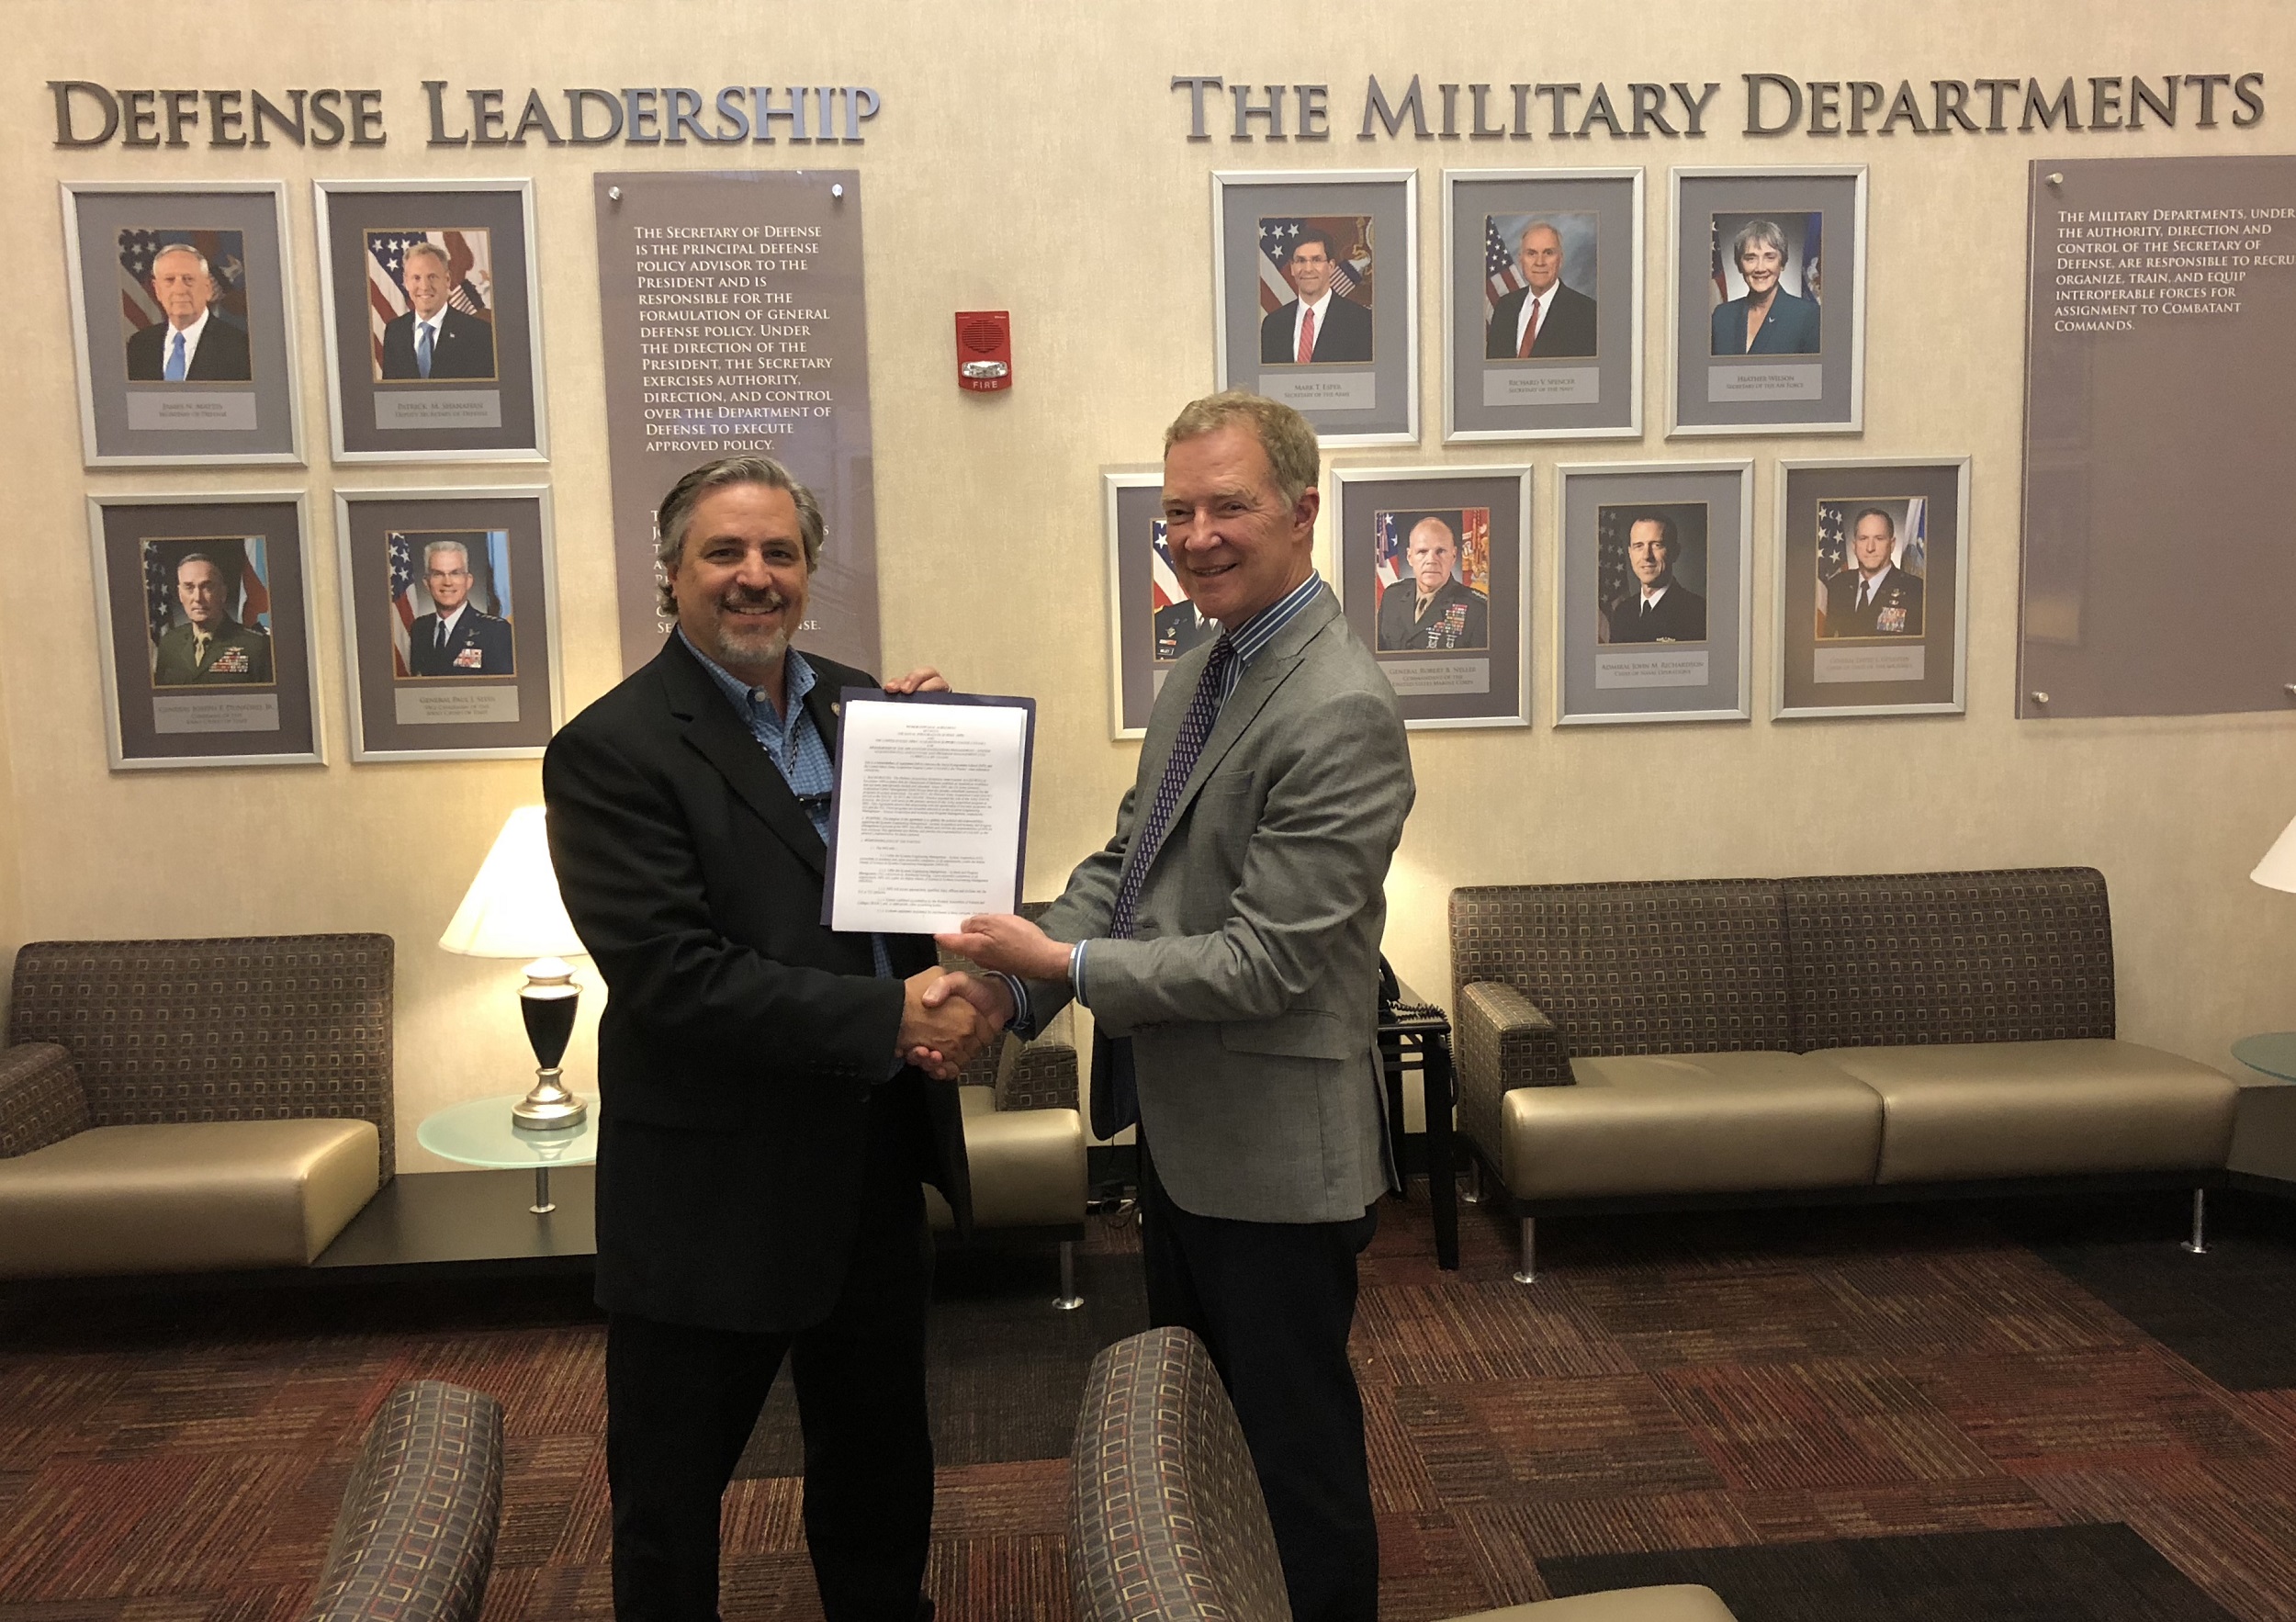 Craig A. Spisak, left, the Army DACM, and Professor John T. Dillard, Col., USA (Ret.), NPS senior lecturer in systems acquisition management and technical representative for the new curricula, hold the memorandum of agreement signed by Lt. Gen. Paul A. Ostrowski and NPS President Ronald A. Route, Vice Adm., USN (Ret.), on May 18 at the Pentagon. The memorandum cements a partnership to provide relevant education to the Army’s military and civilian acquisition workforce. (Photo courtesy of John T. Dillard)